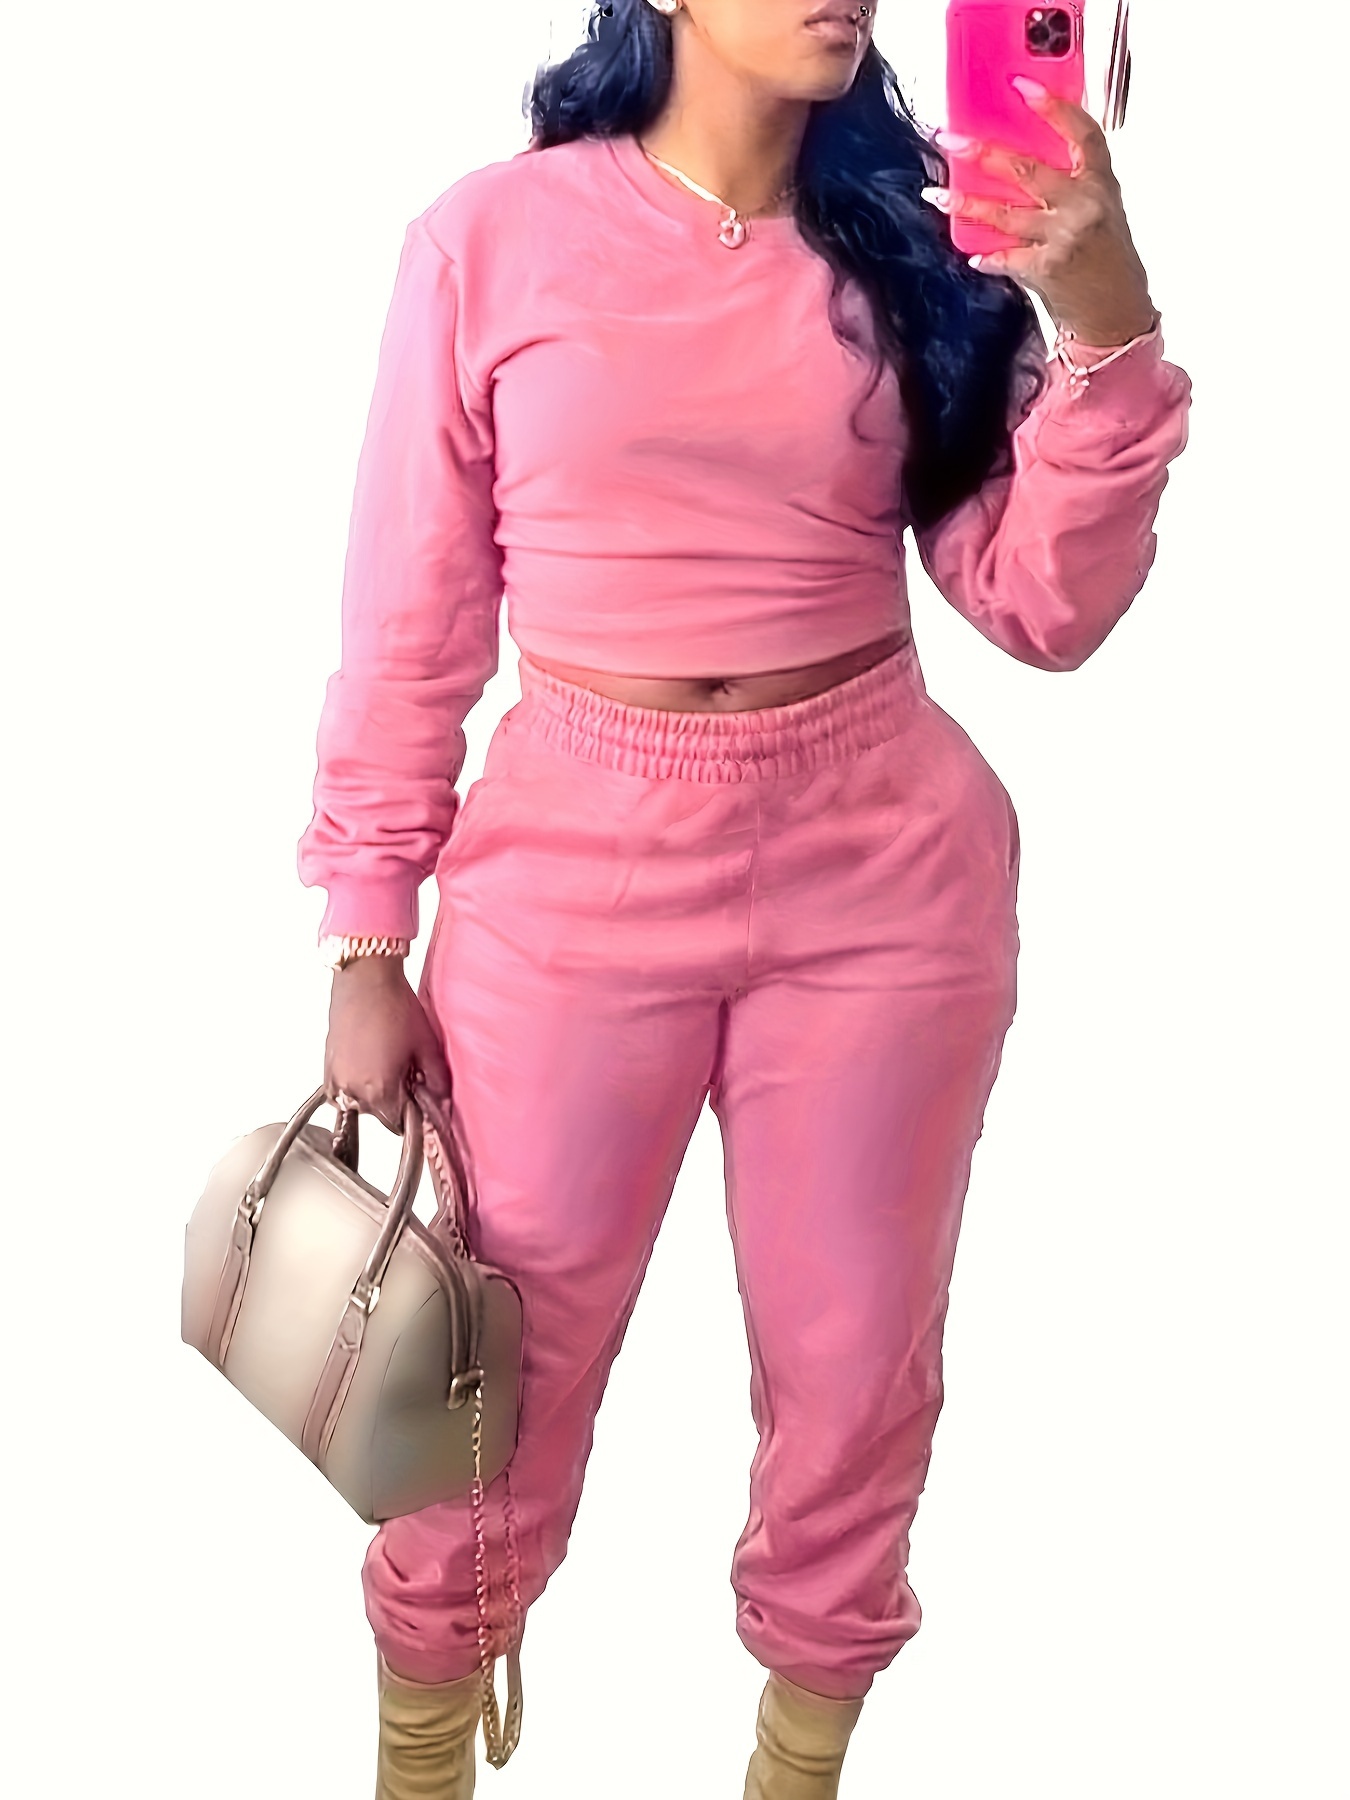 YWDJ Two Piece Outfits for Women Classy Women Plus Size Solid Short Sleeve  O Neck Bandage Pullover Leisure Tops + Long Pants Set Pink XXXXL 